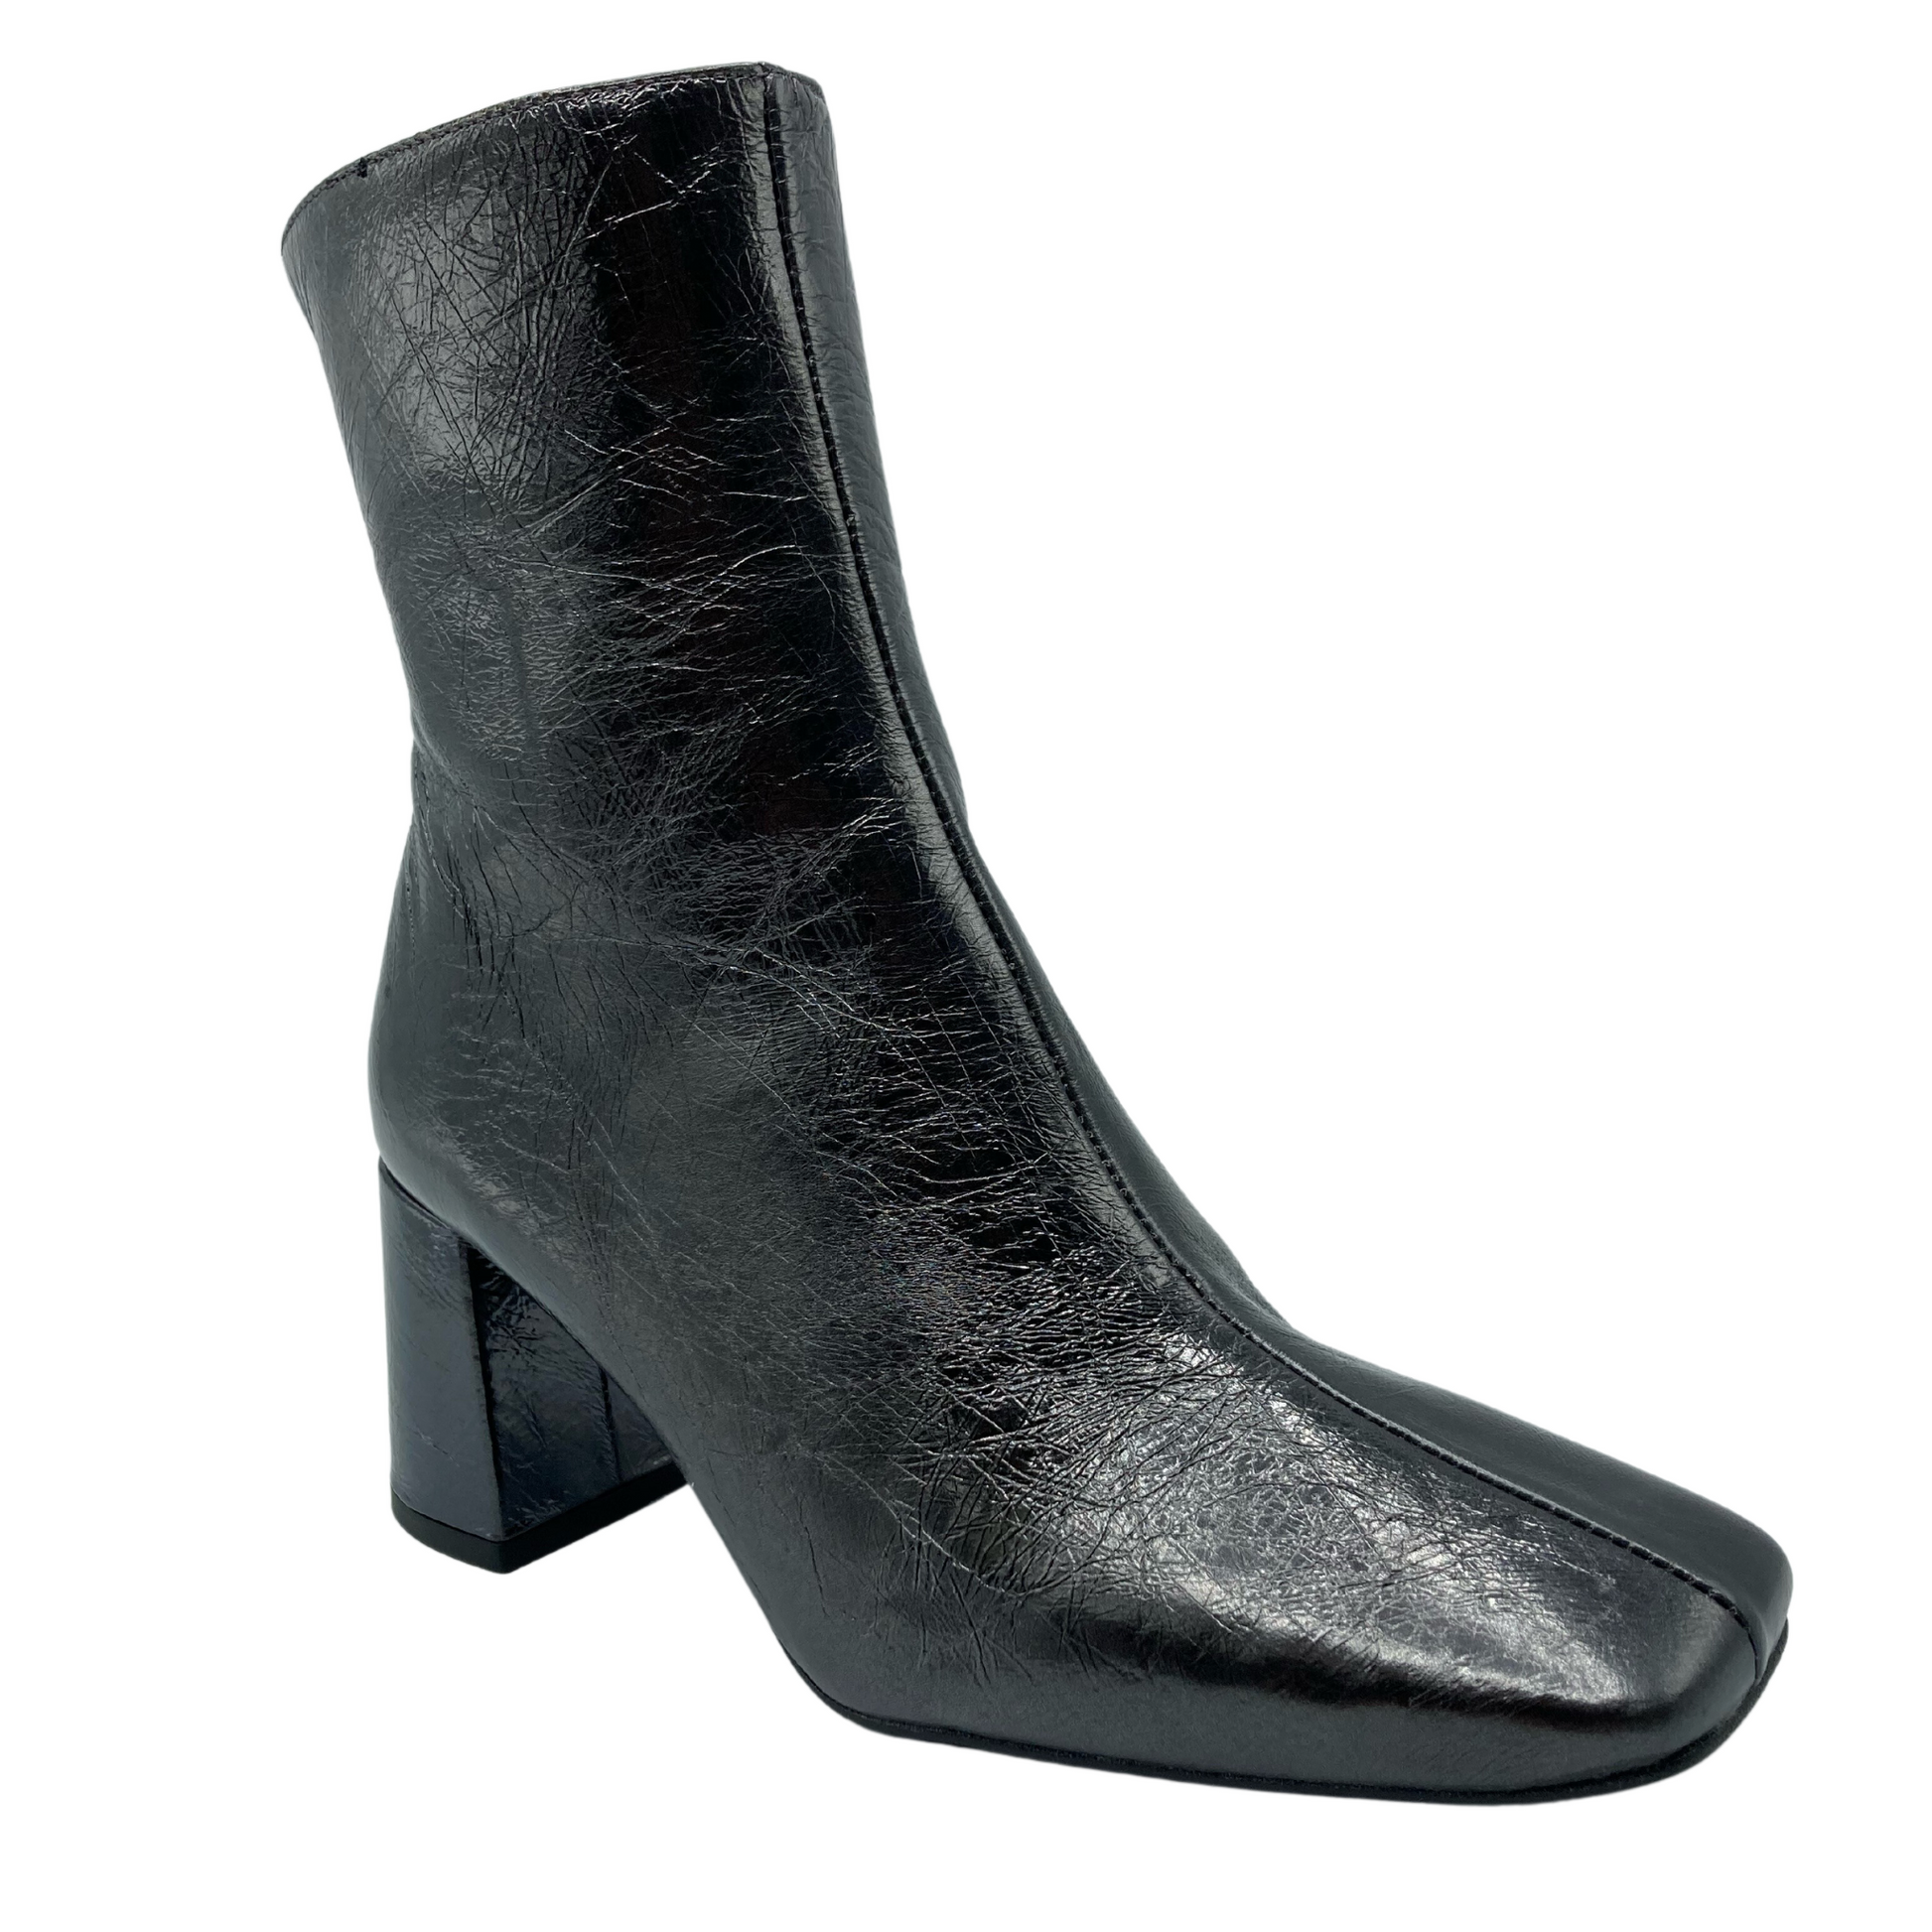 45 degree angled view of textured leather short boot with block heel and square toe